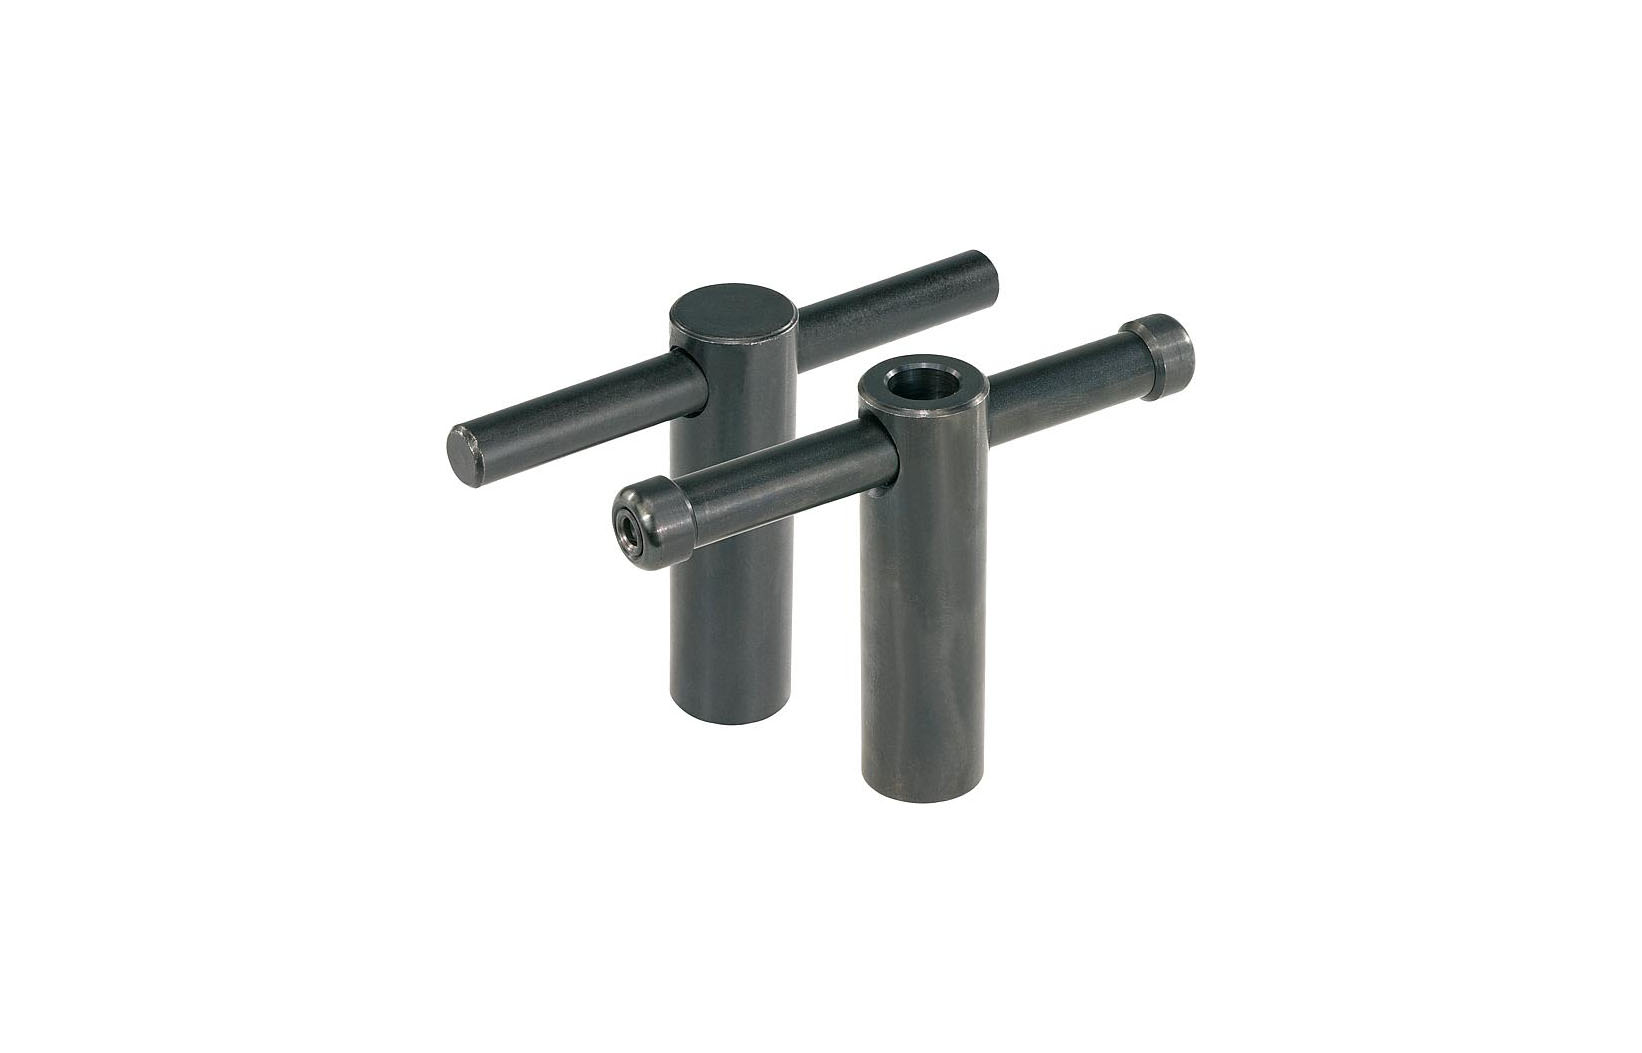 K0755 Tommy bars with fixed or sliding T-bar, DIN 6305 or DIN 6307